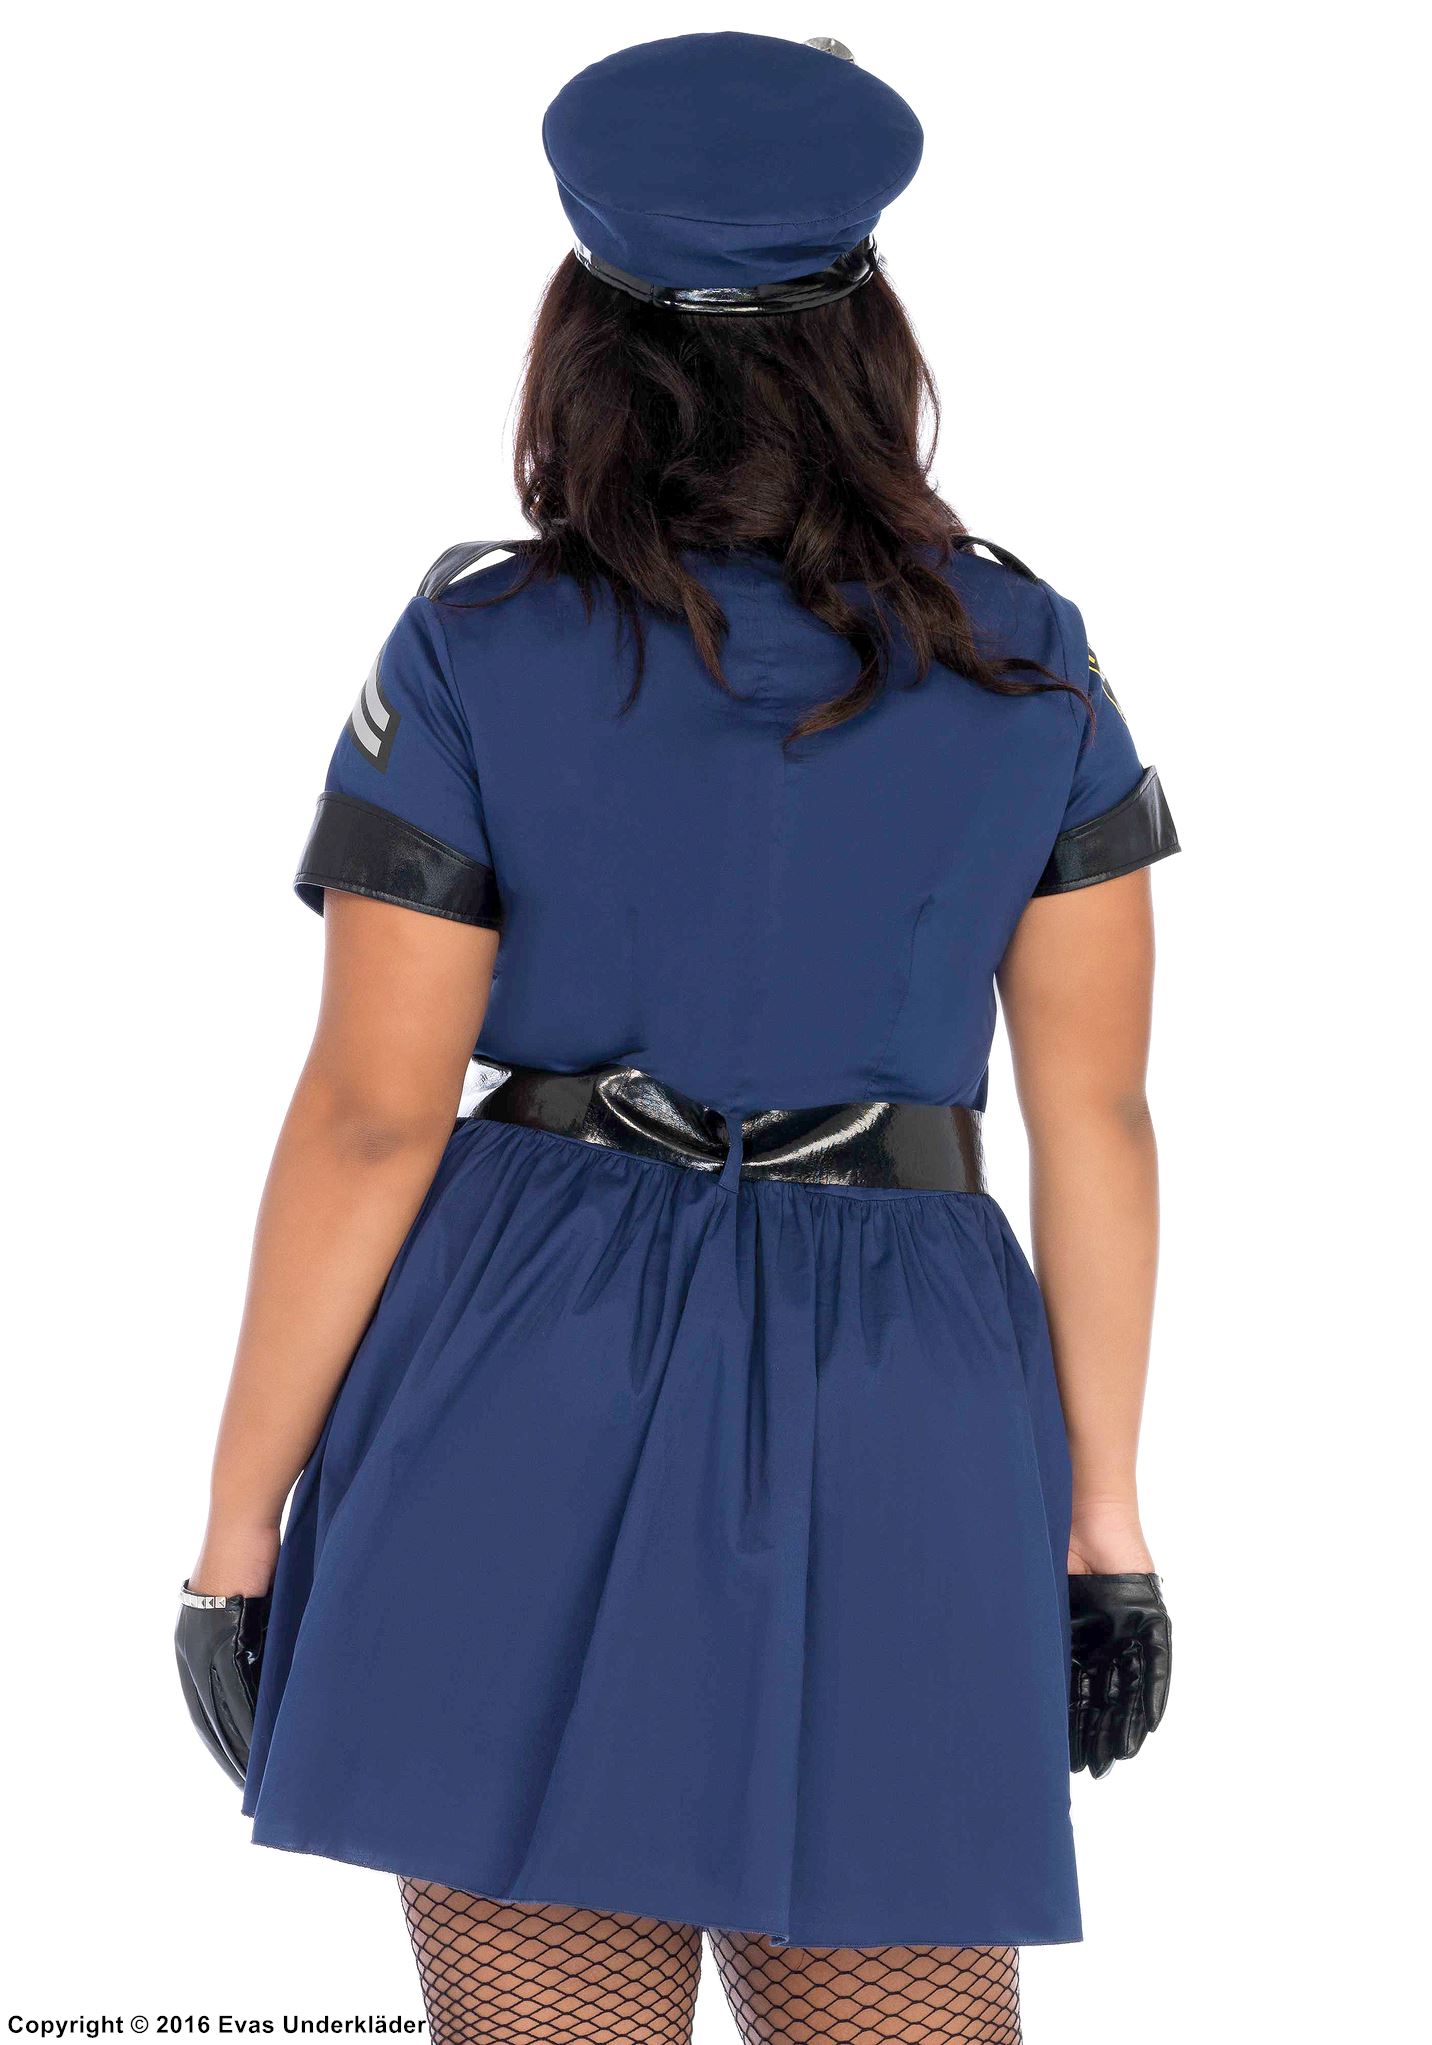 Female police officer, costume dress, front zipper, XL to 4XL